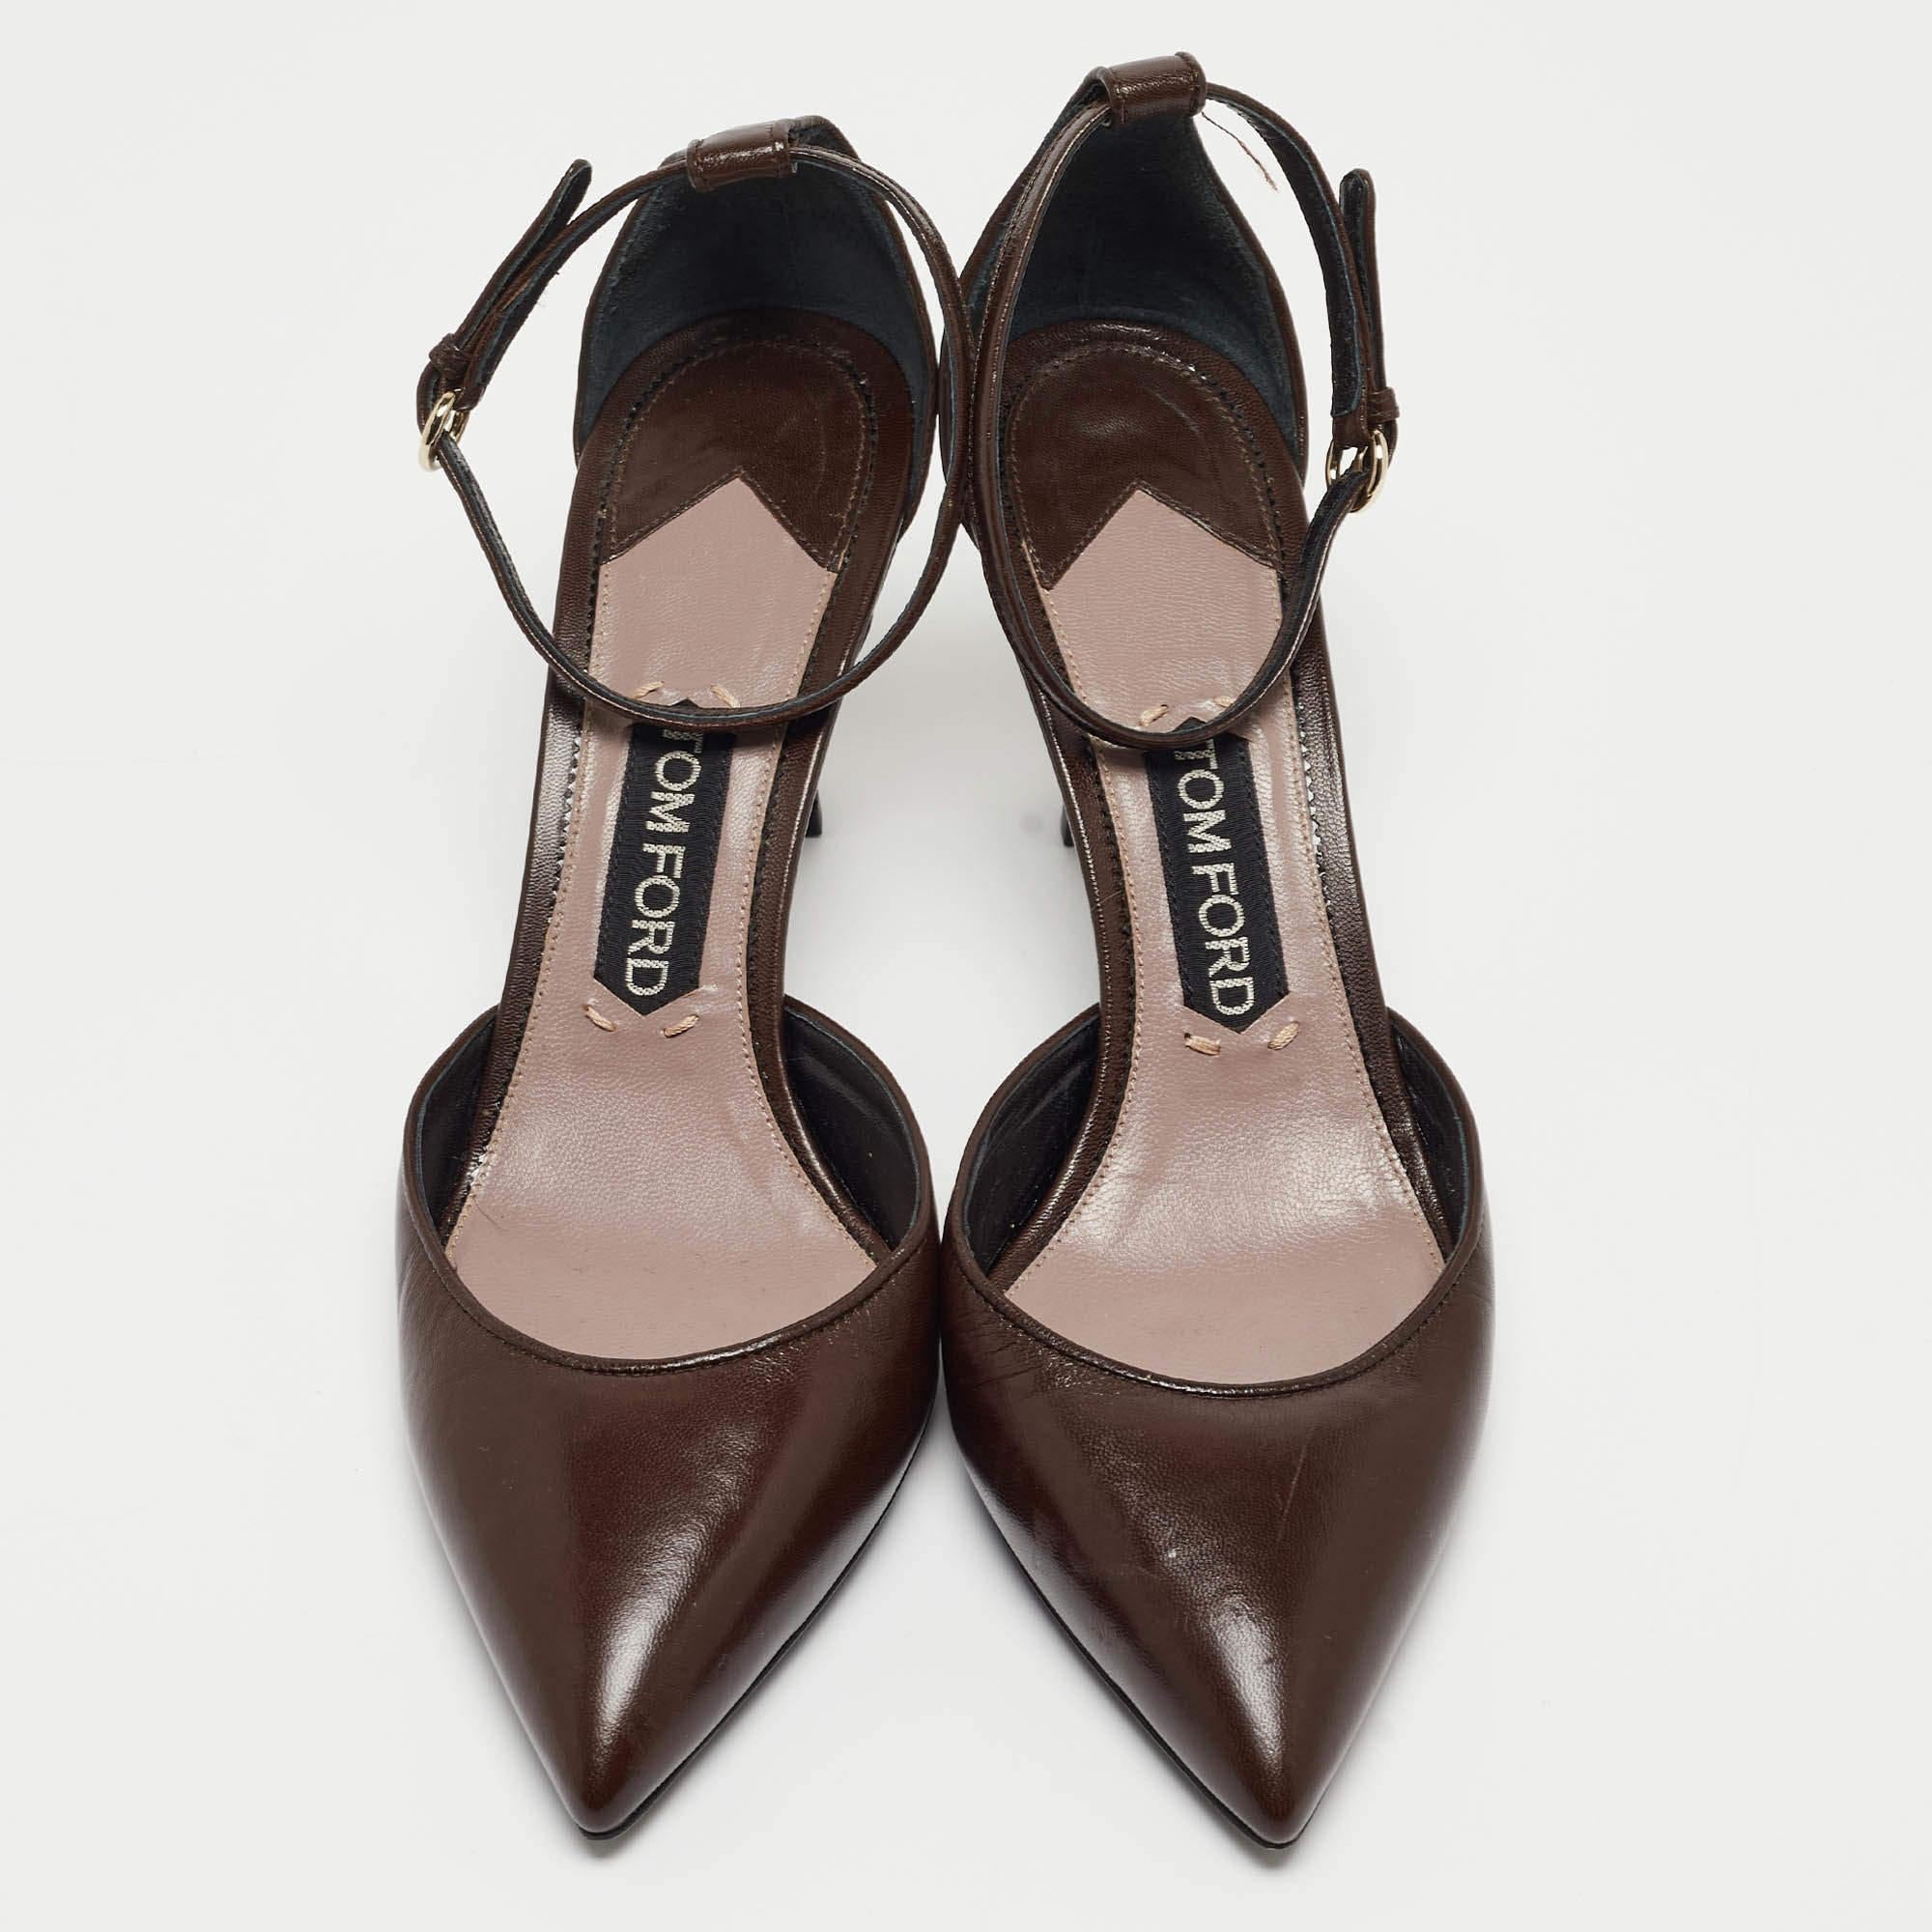 The fashion house’s tradition of excellence, coupled with modern design sensibilities, works to make these Tom Ford brown pumps a fabulous choice. They'll help you deliver a chic look with ease.

